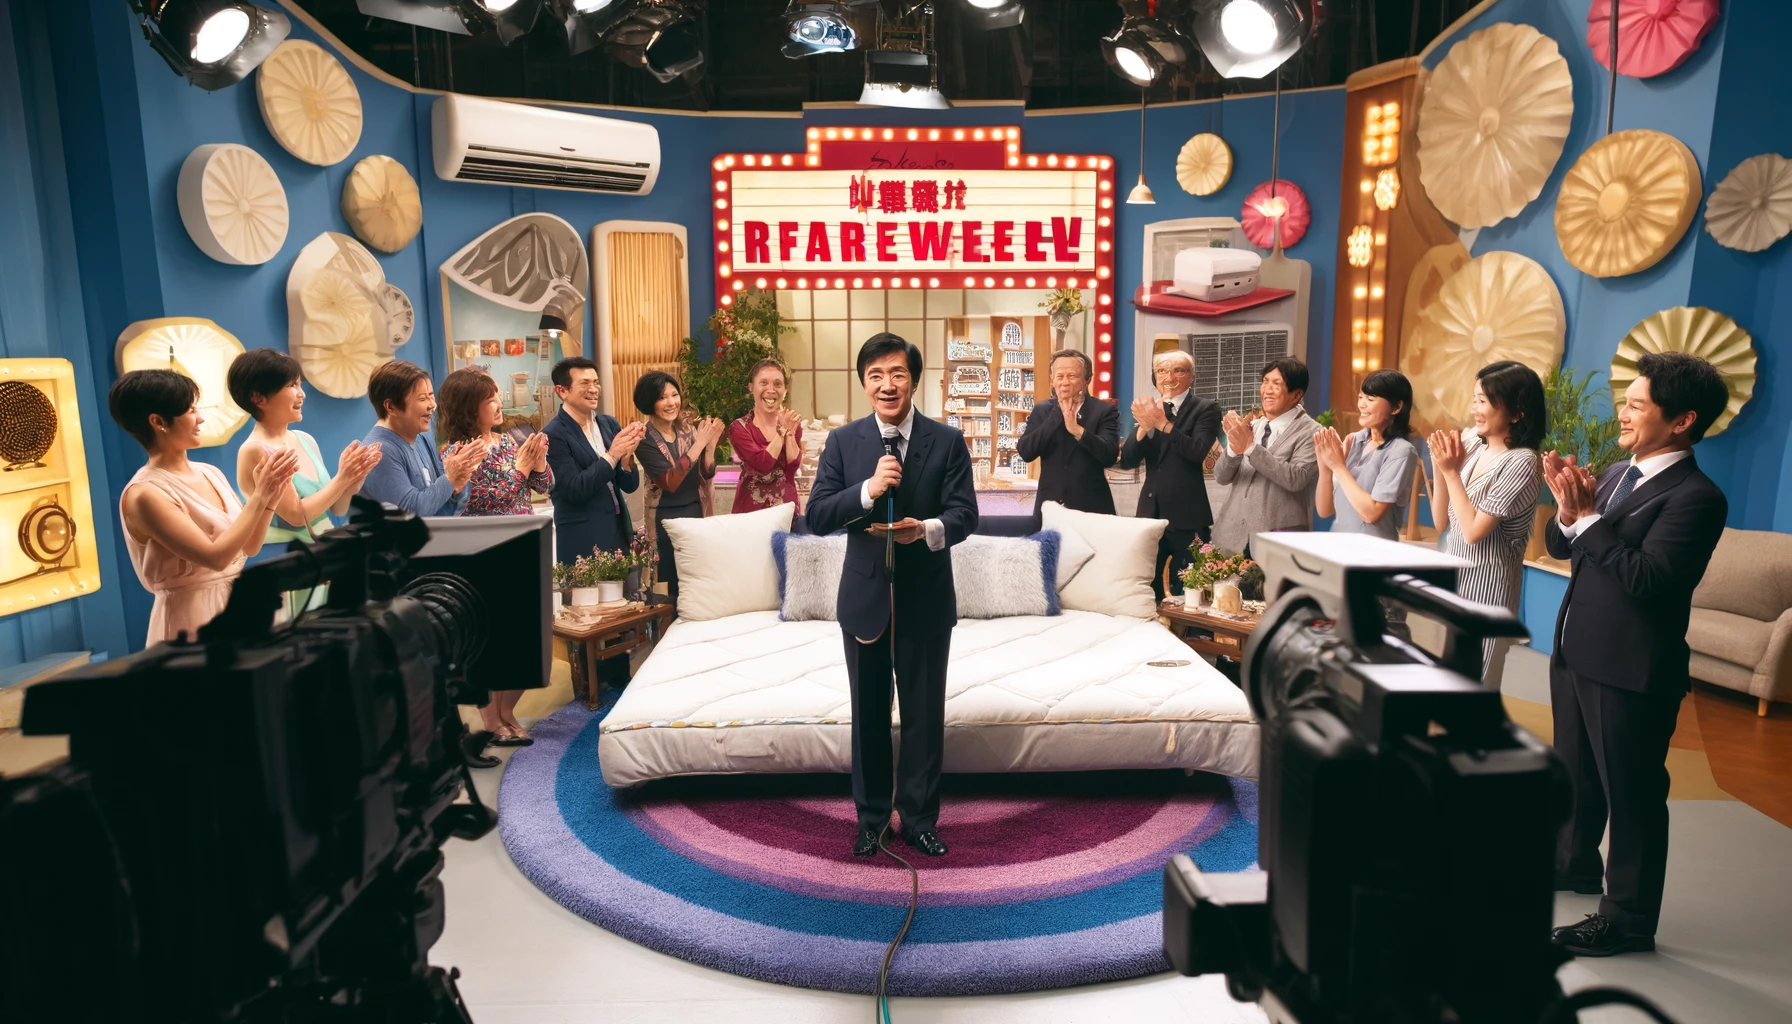 A vivid television studio scene capturing the retirement of a popular TV shopping host, complete with home products. The studio is decorated with colorful farewell banners. The host, a middle-aged Asian man with short black hair, wears a formal suit and holds a microphone, surrounded by applauding colleagues and a small audience. Featured in the scene are an air conditioner mounted on the wall, and a display of fluffy futons. Cameras and studio lights add to the lively ambiance, emphasizing a festive and emotional farewell.